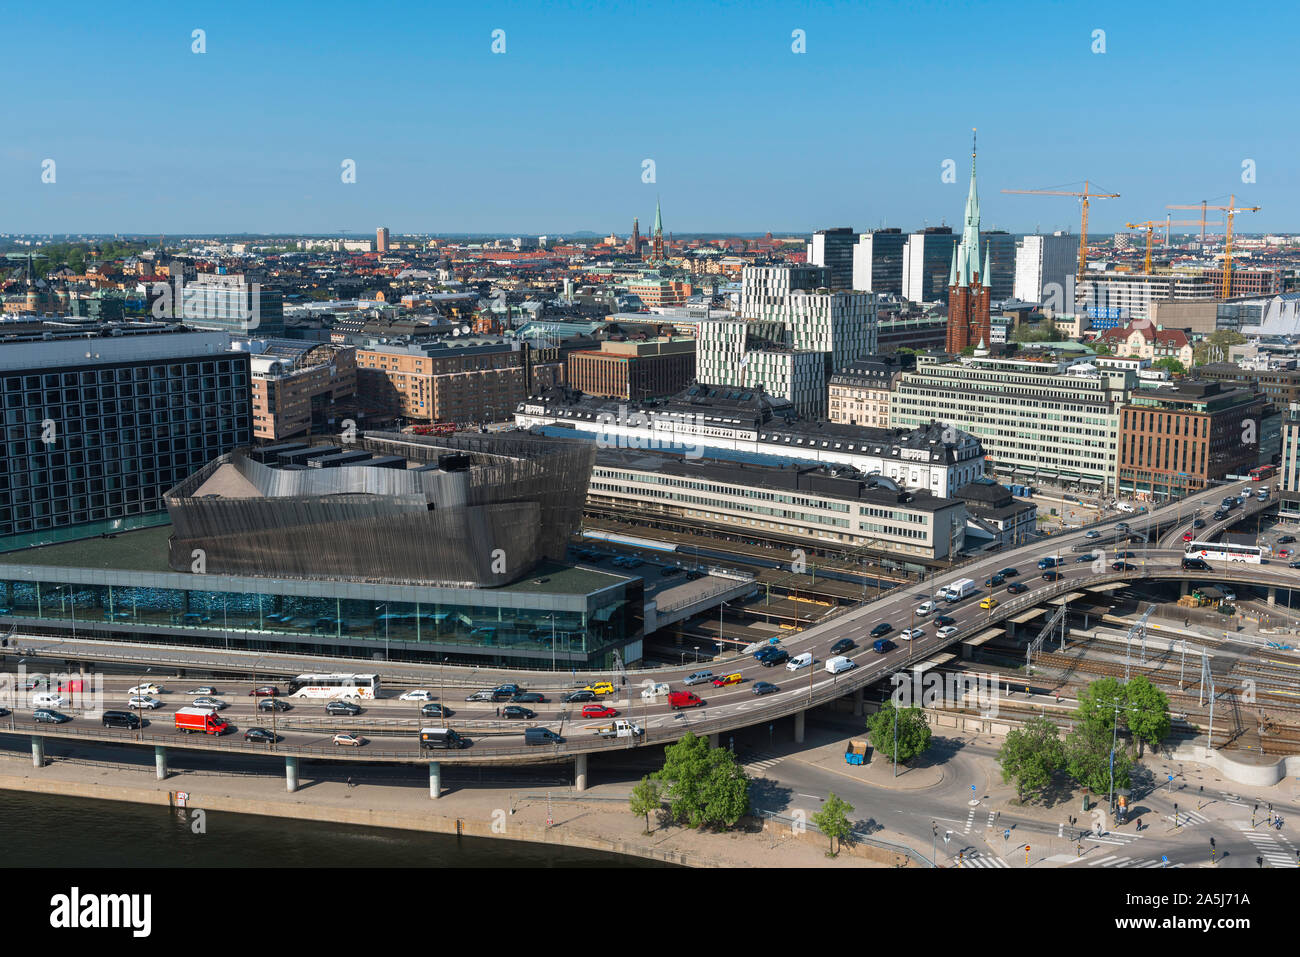 Stockholm city center, view of traffic passing through the modern Tegelbacken area in the Norrmalm district of central Stockholm, Sweden. Stock Photo